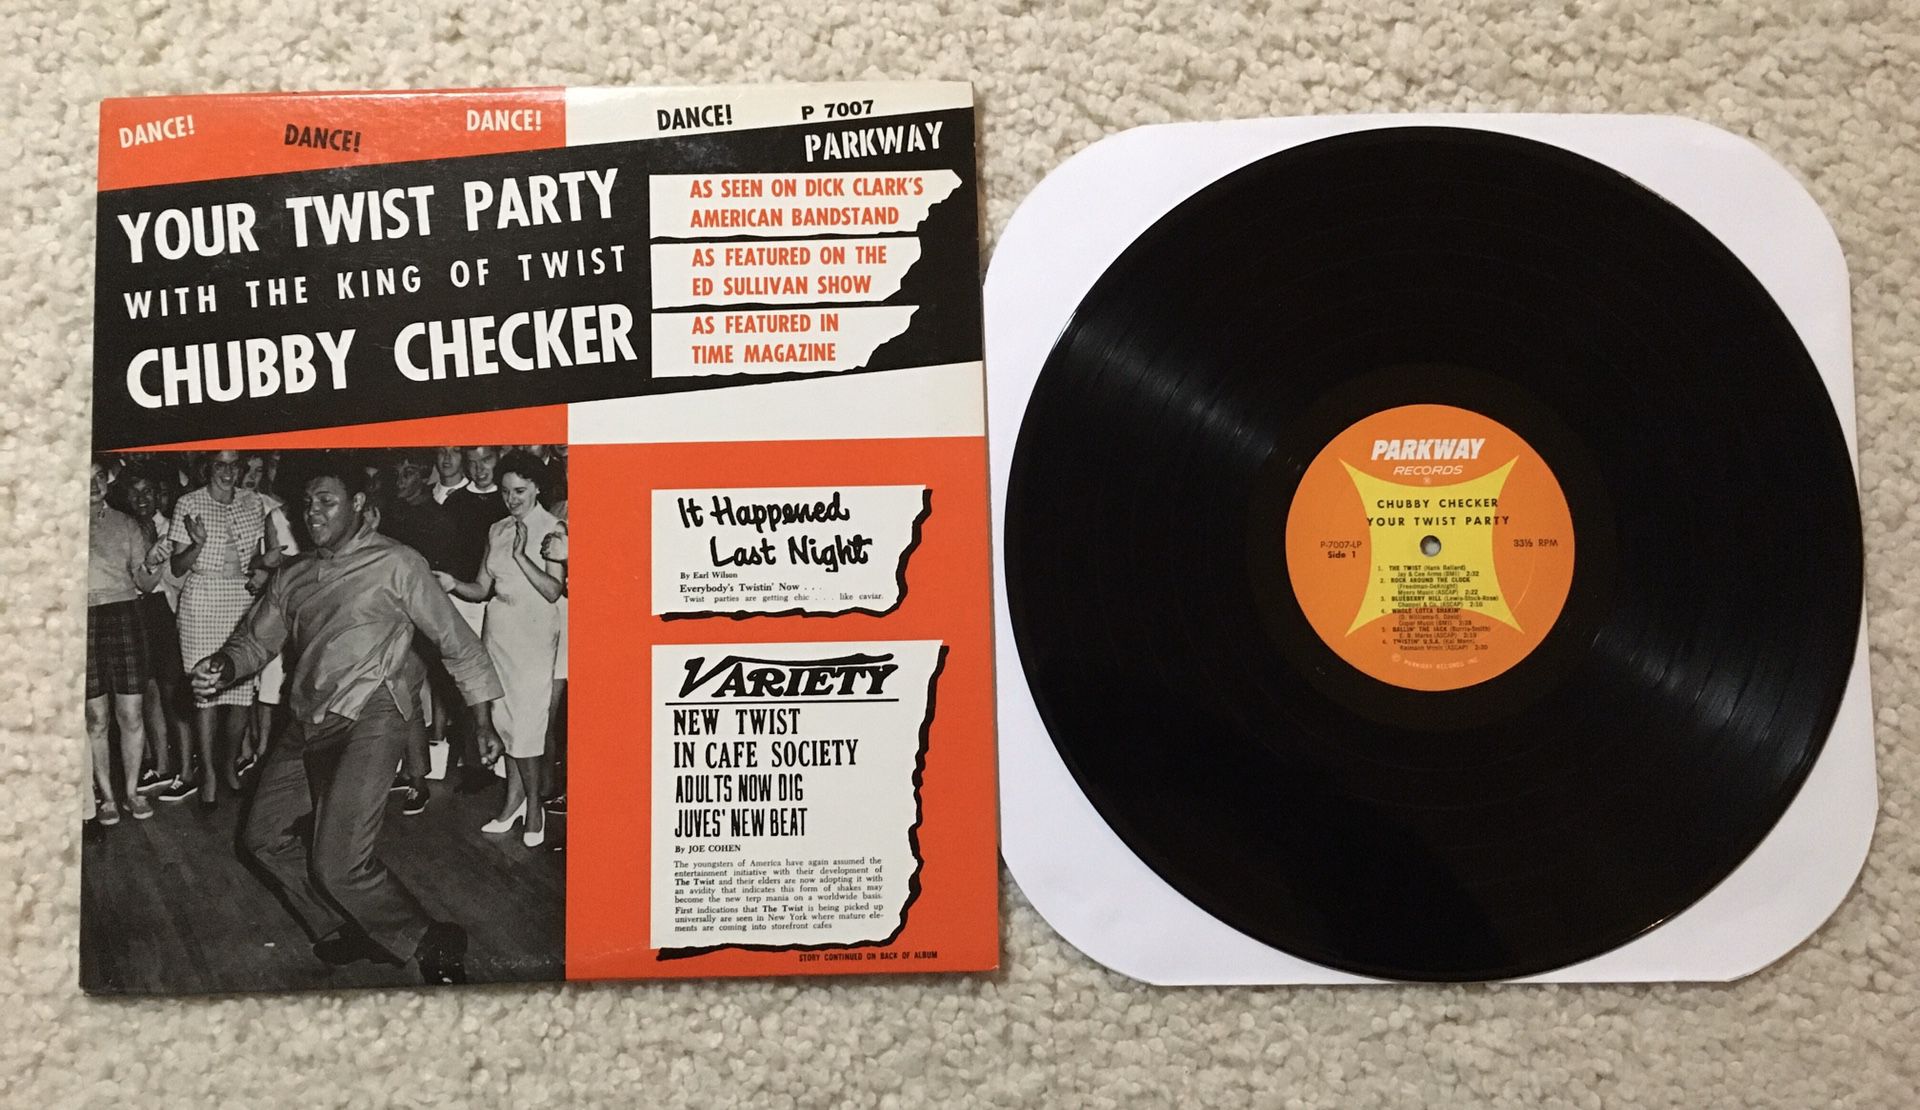 Chubby Checker “Your Twist Party (With The King Of Twist)” vinyl lp 1961 Parkway Records Mono Pressing gorgeous like new collector’s copy Rock & Roll